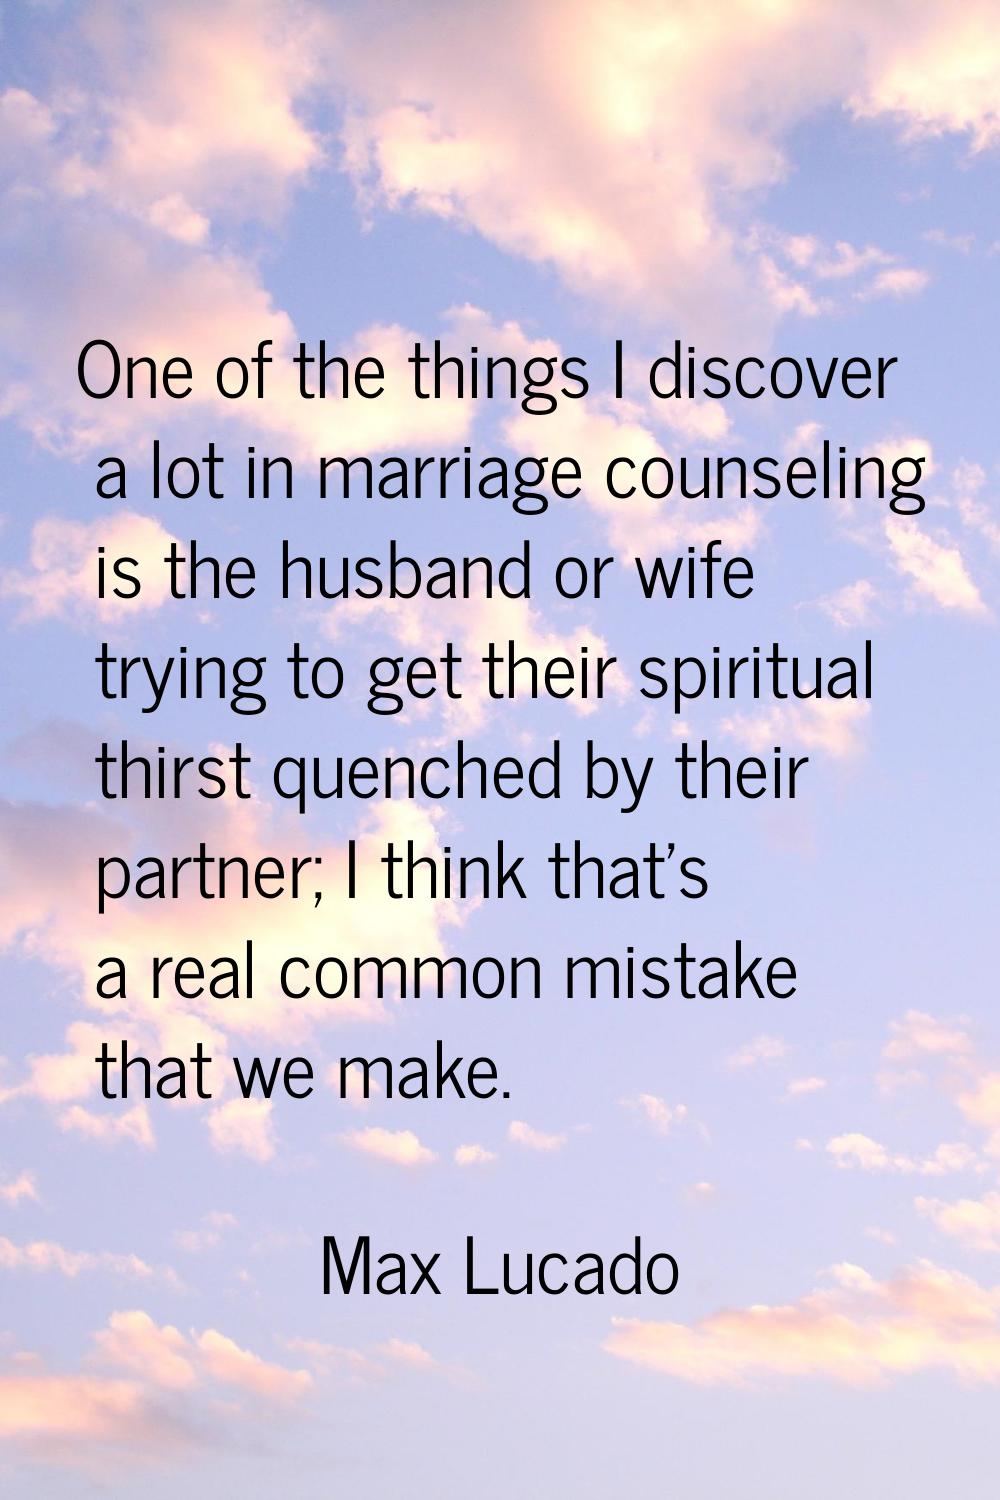 One of the things I discover a lot in marriage counseling is the husband or wife trying to get thei